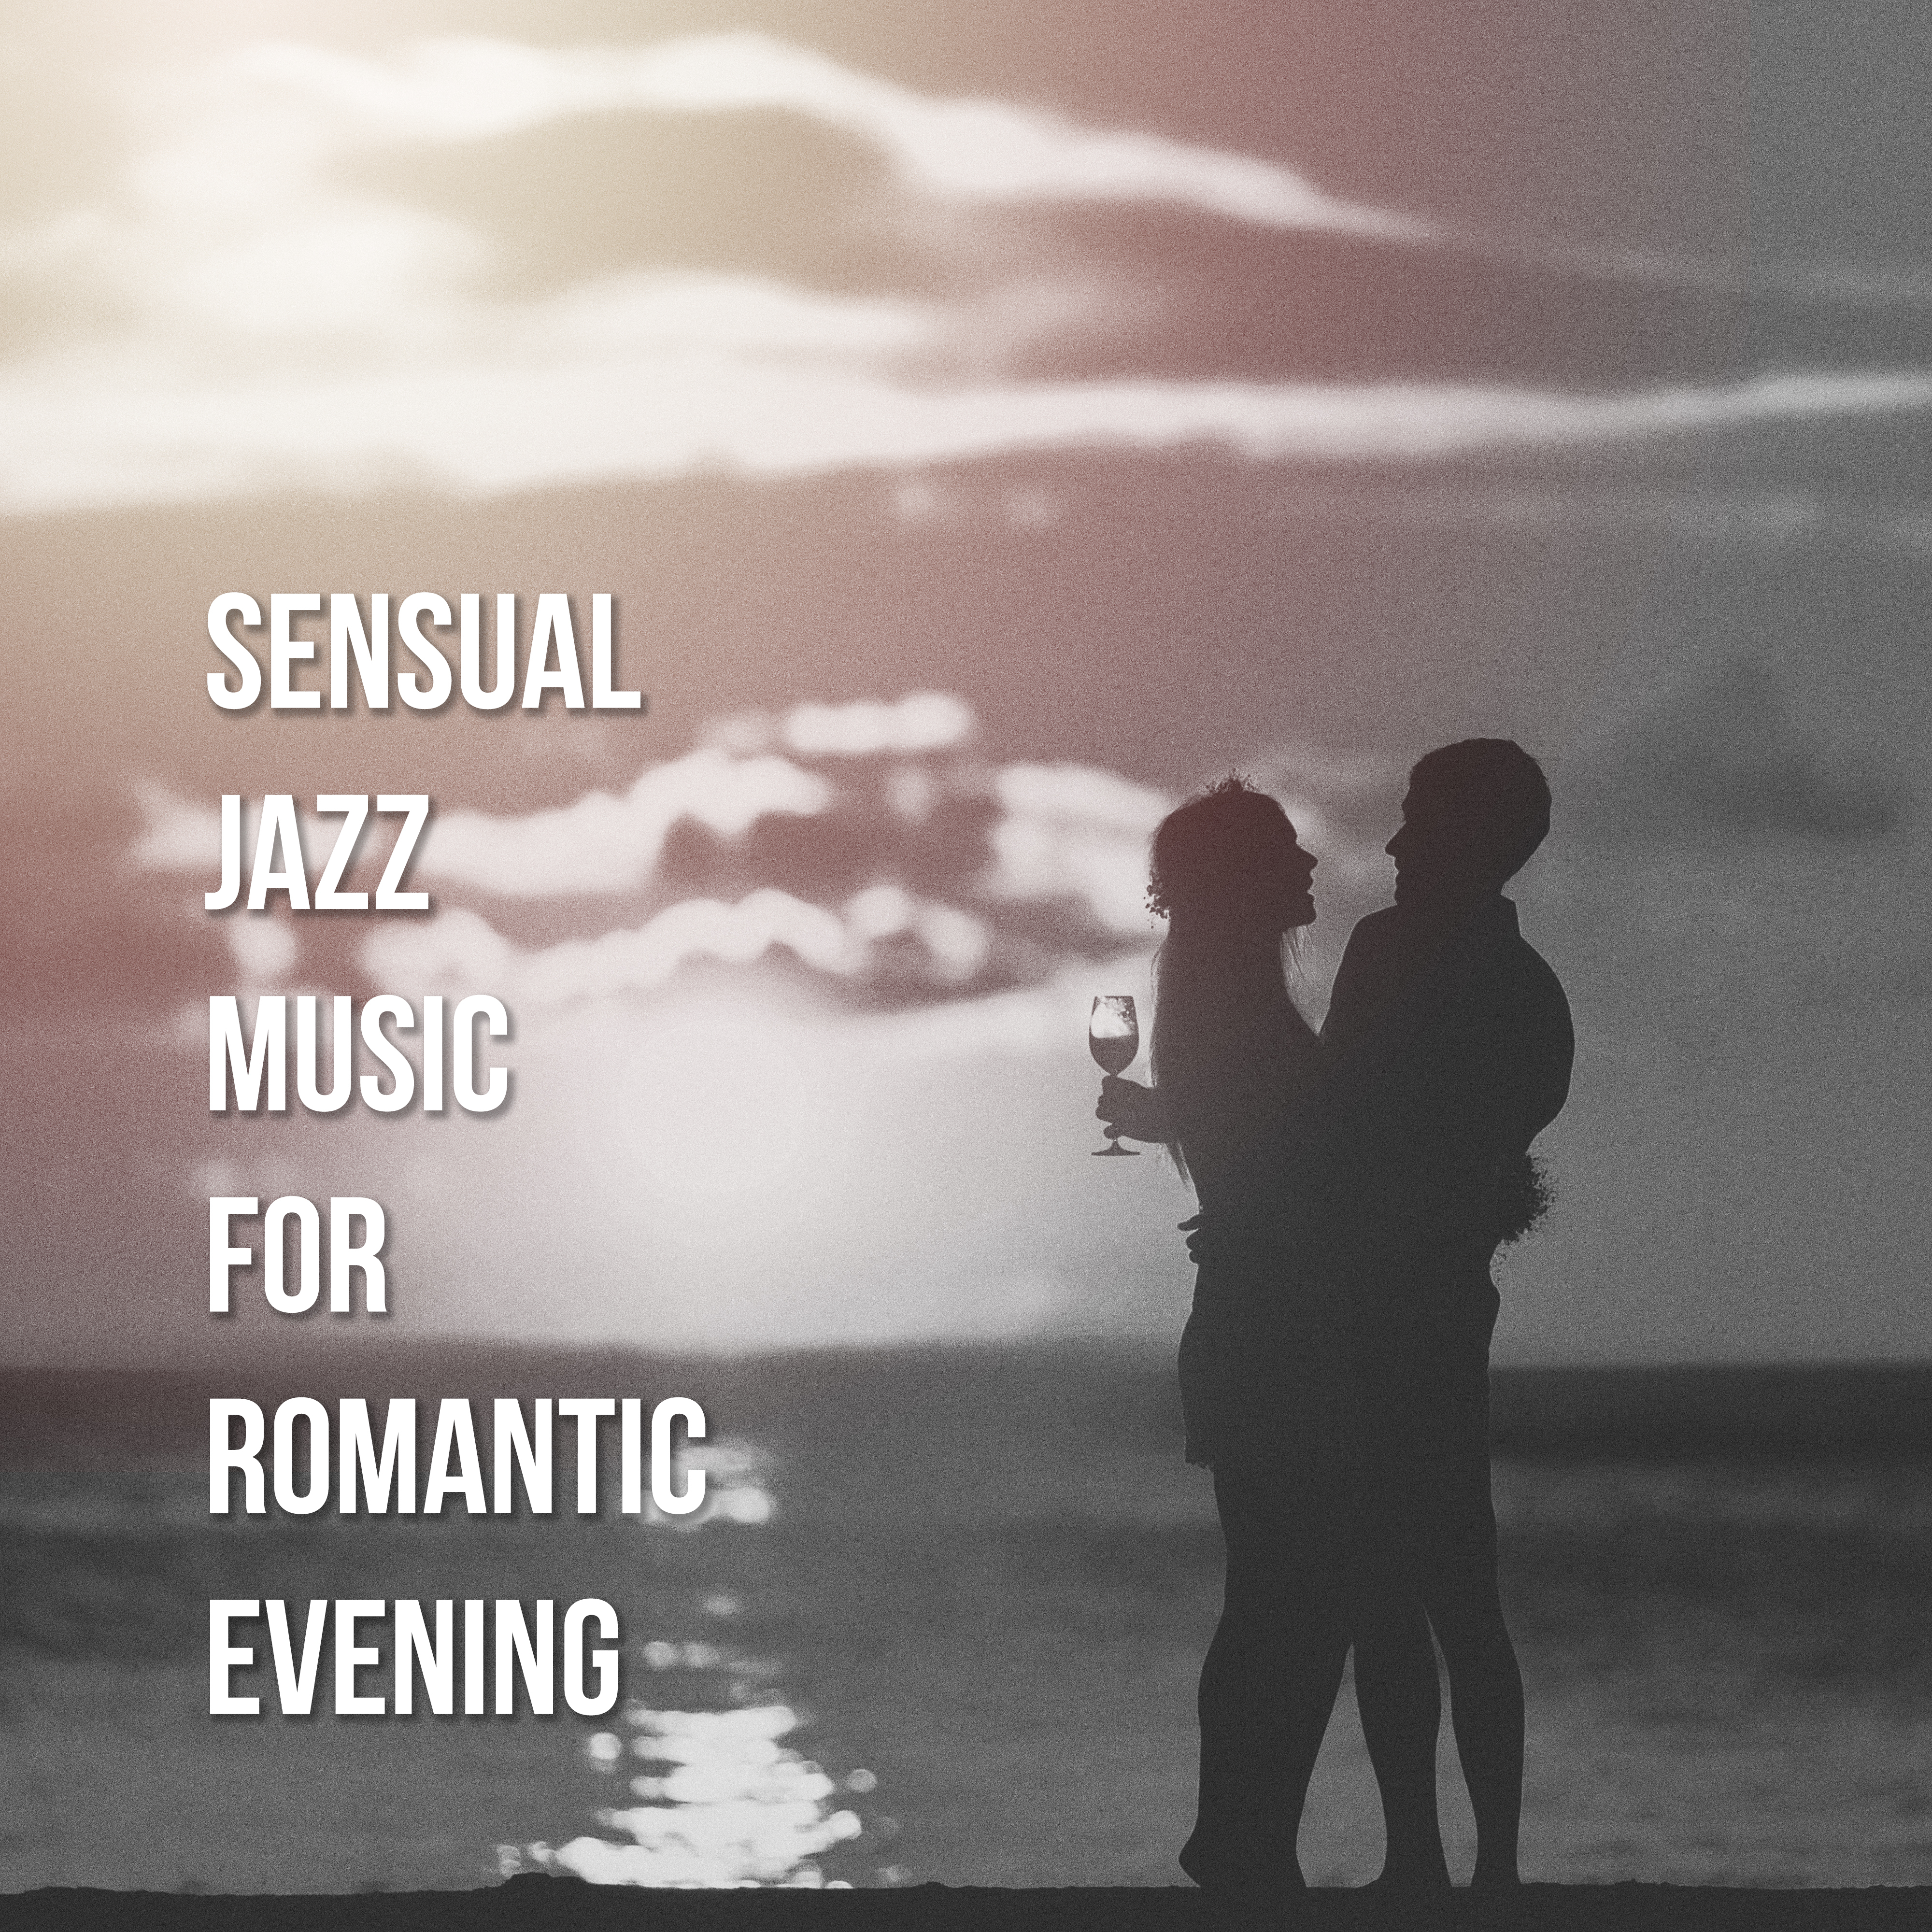 Sensual Jazz Music for Romantic Evening – **** Saxophone Music, Soft Jazz Sounds, Chilled Moments, Sensual Music